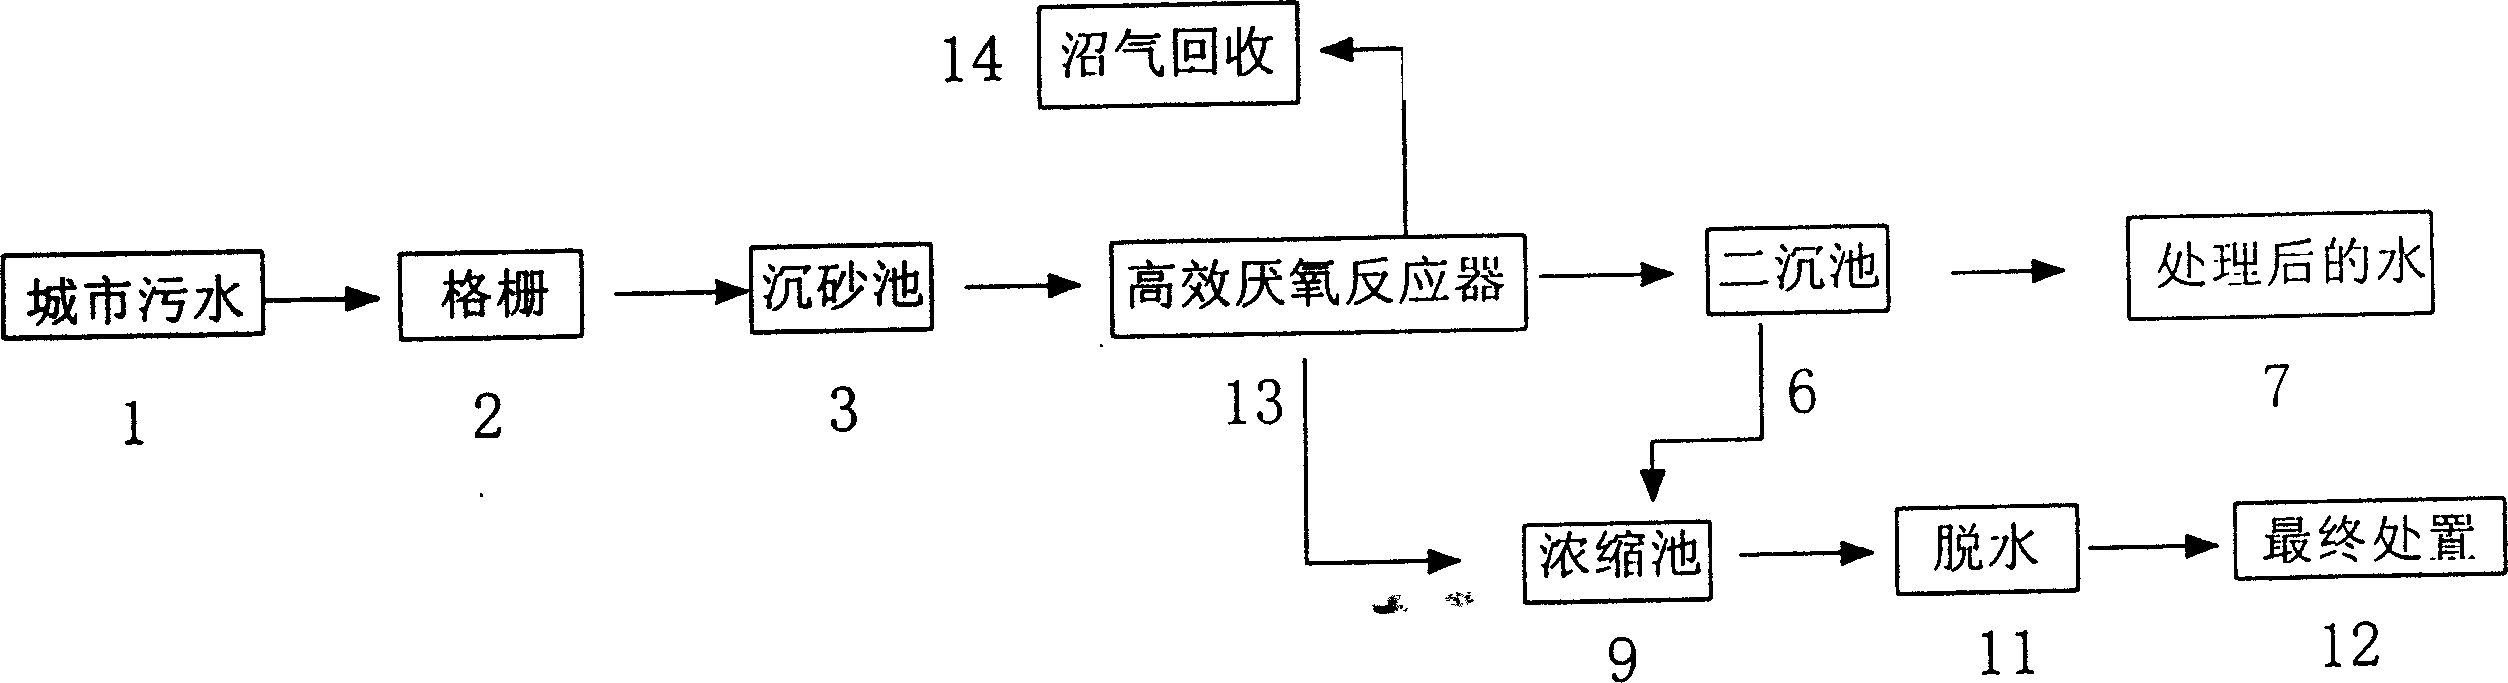 Process and method for treating city waste warter